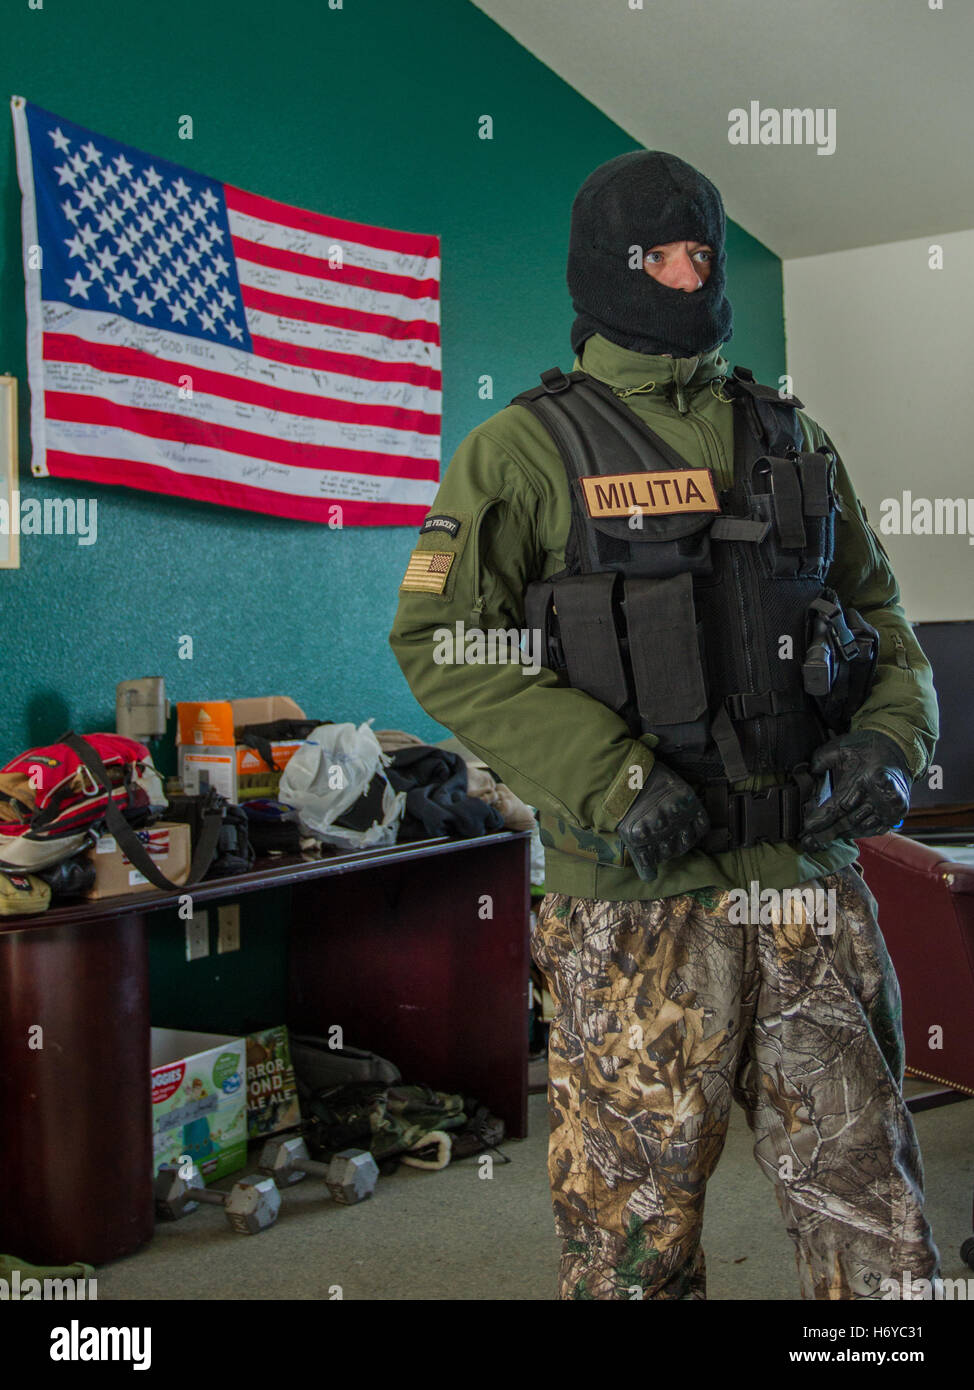 WA 3% militia member in the bunkhouse of the occupied Malheur National Wildlife Refuge during the January 2016 occupation. Stock Photo